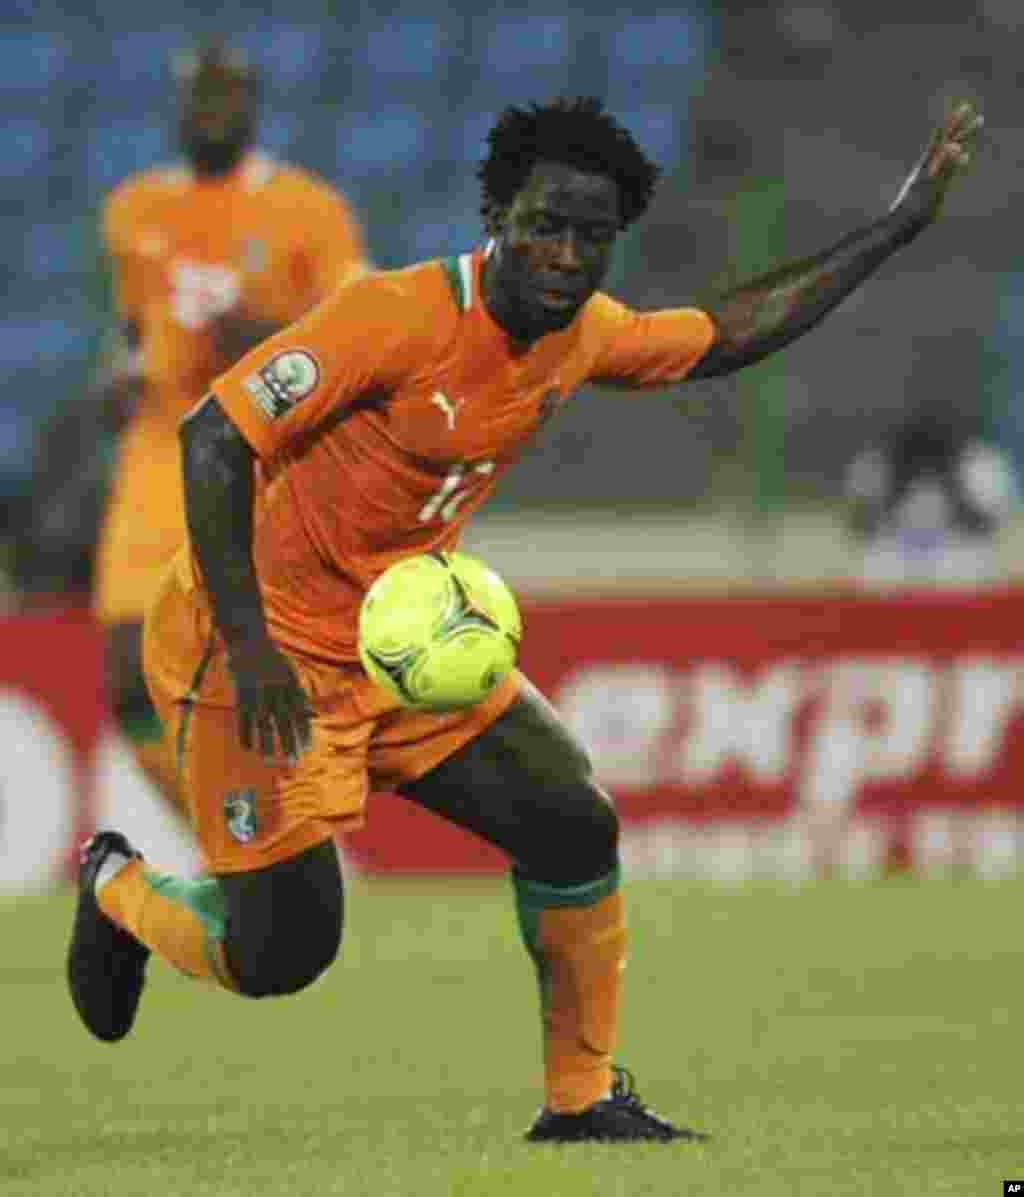 Wilfried Bony of Ivory Coast controls the ball during their African Nations Cup soccer match against Angola in Malabo January 30, 2012.